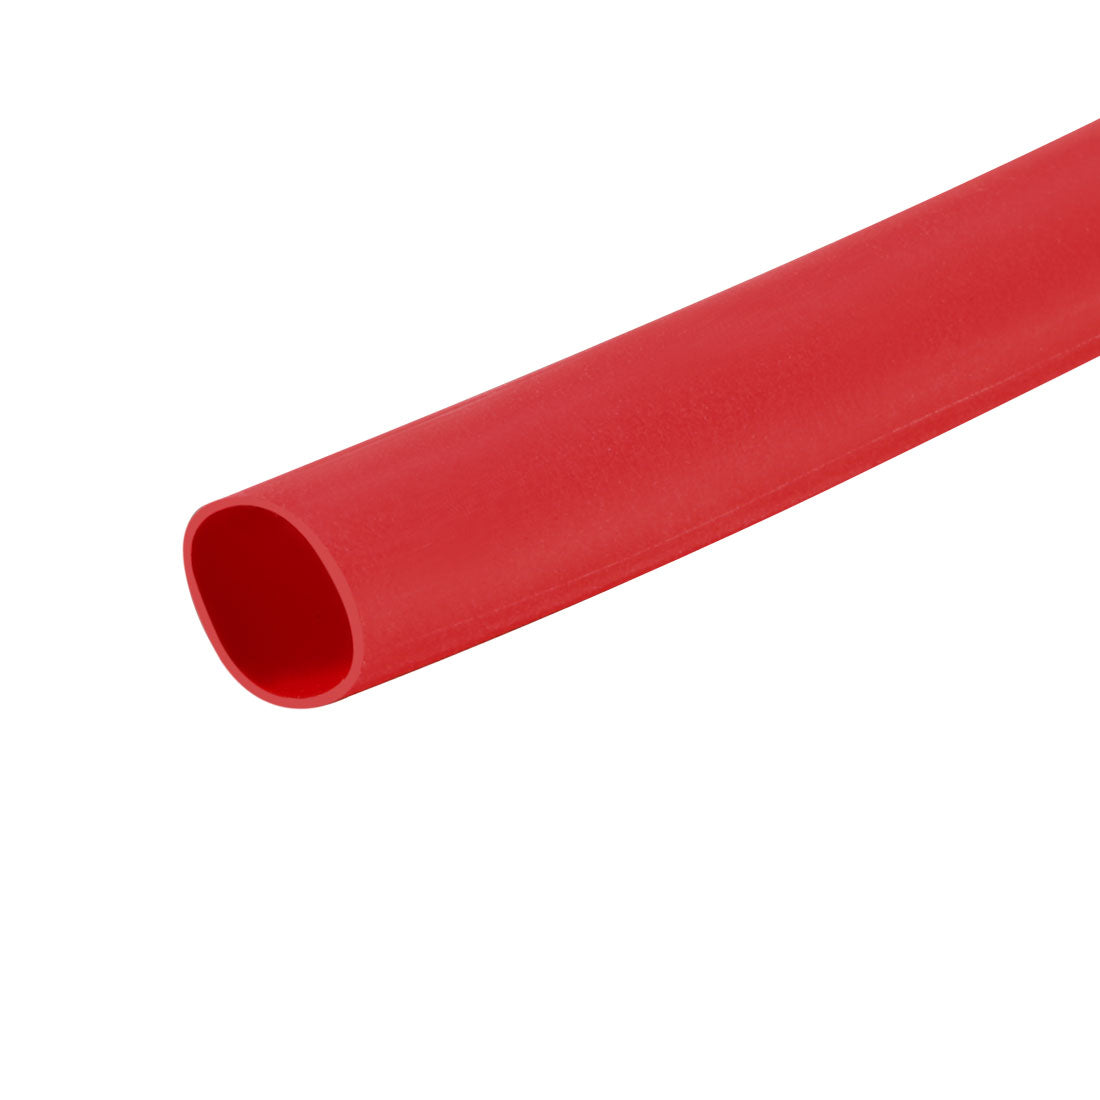 uxcell Uxcell Heat Shrink Tube 2:1 Electrical Insulation Tube Wire Cable Tubing Sleeving Wrap Red 3mm Diameter 1m Long